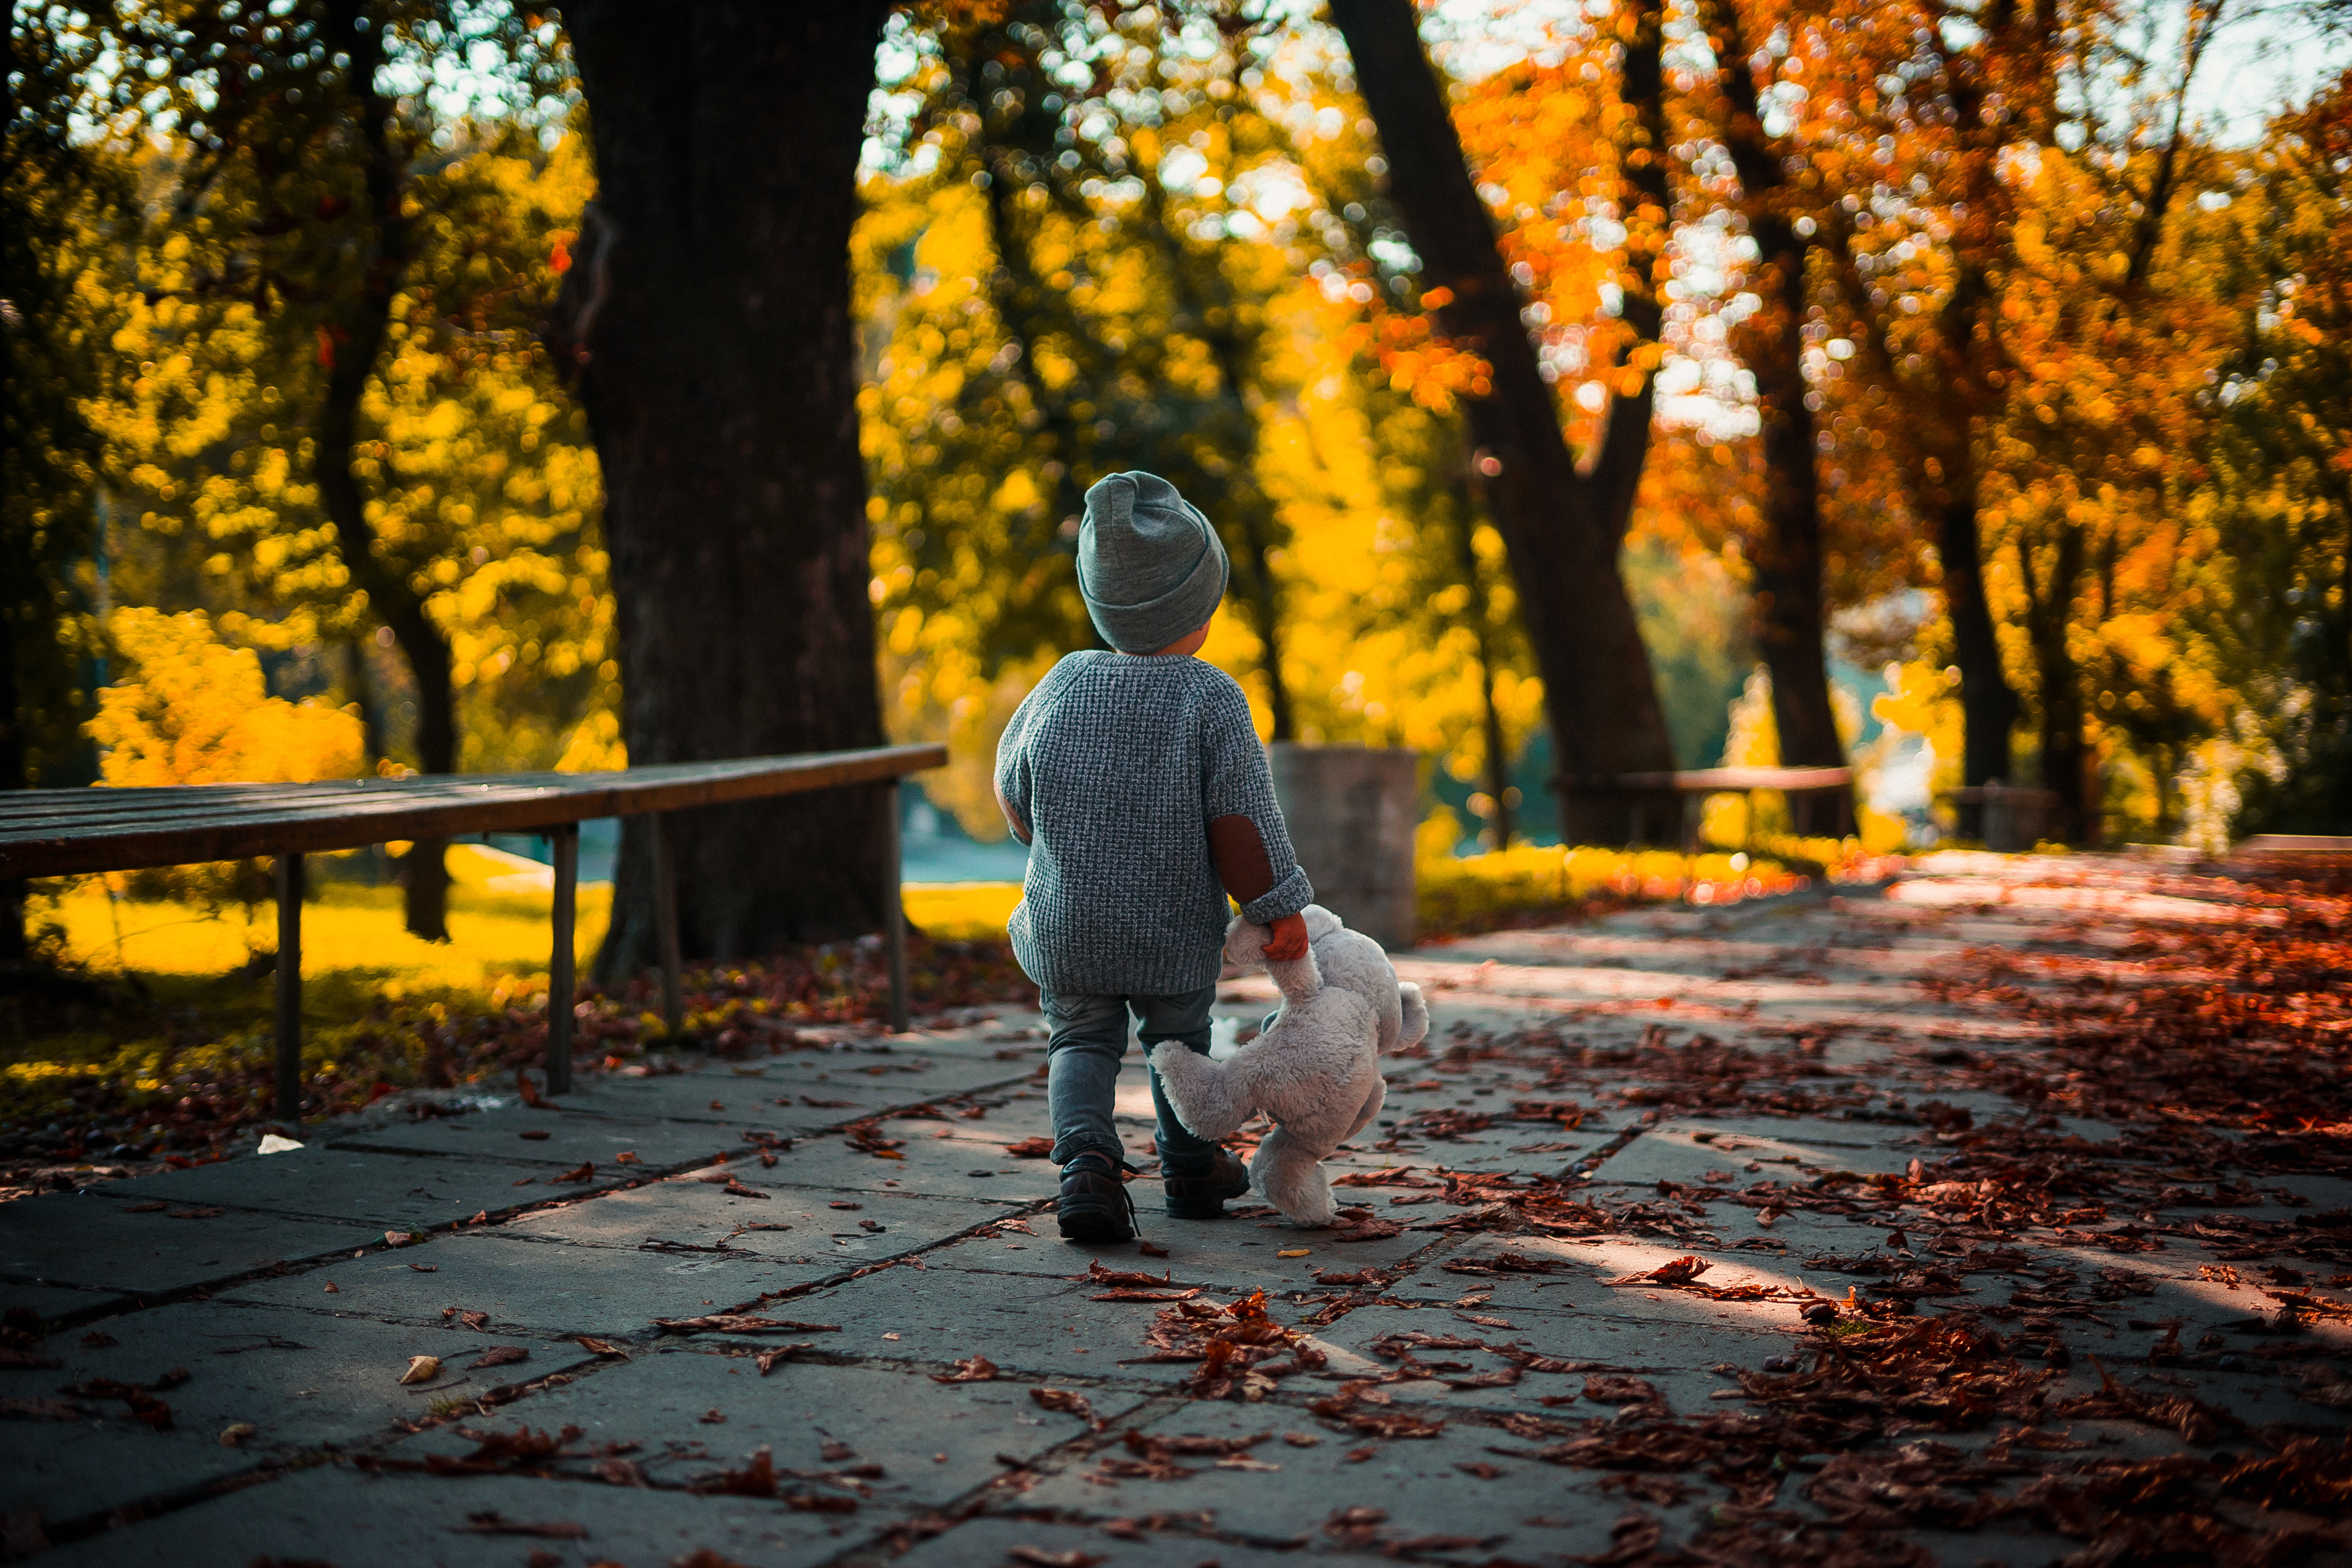 142691 download wallpaper autumn, teddy bear, miscellanea, miscellaneous, stroll, child screensavers and pictures for free